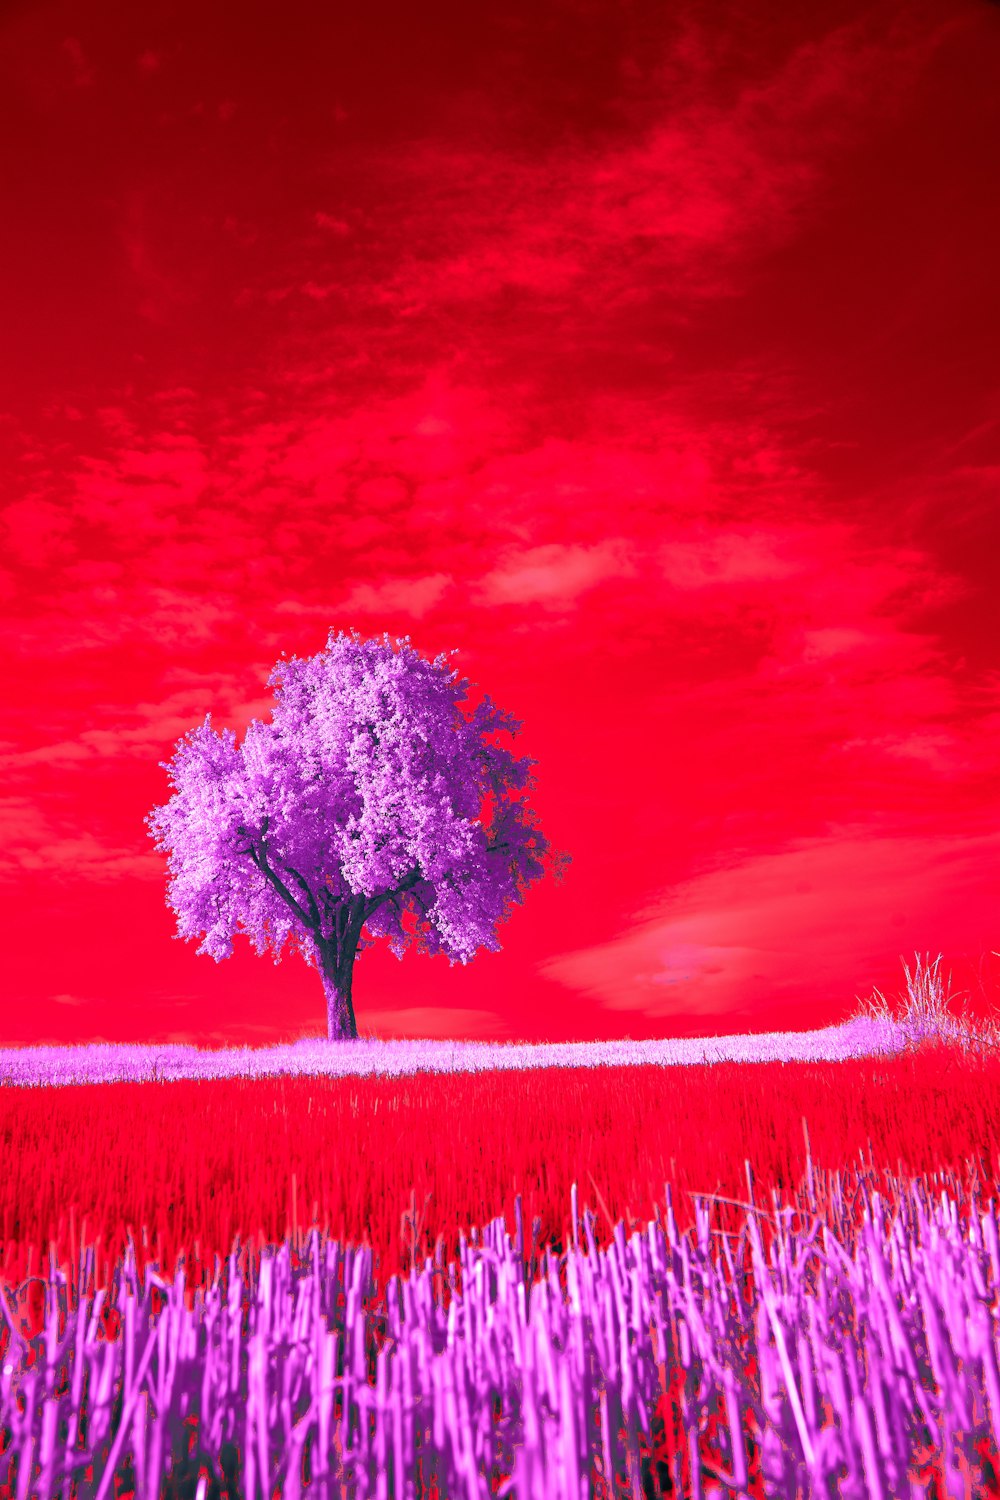 a tree in a field with a red sky in the background